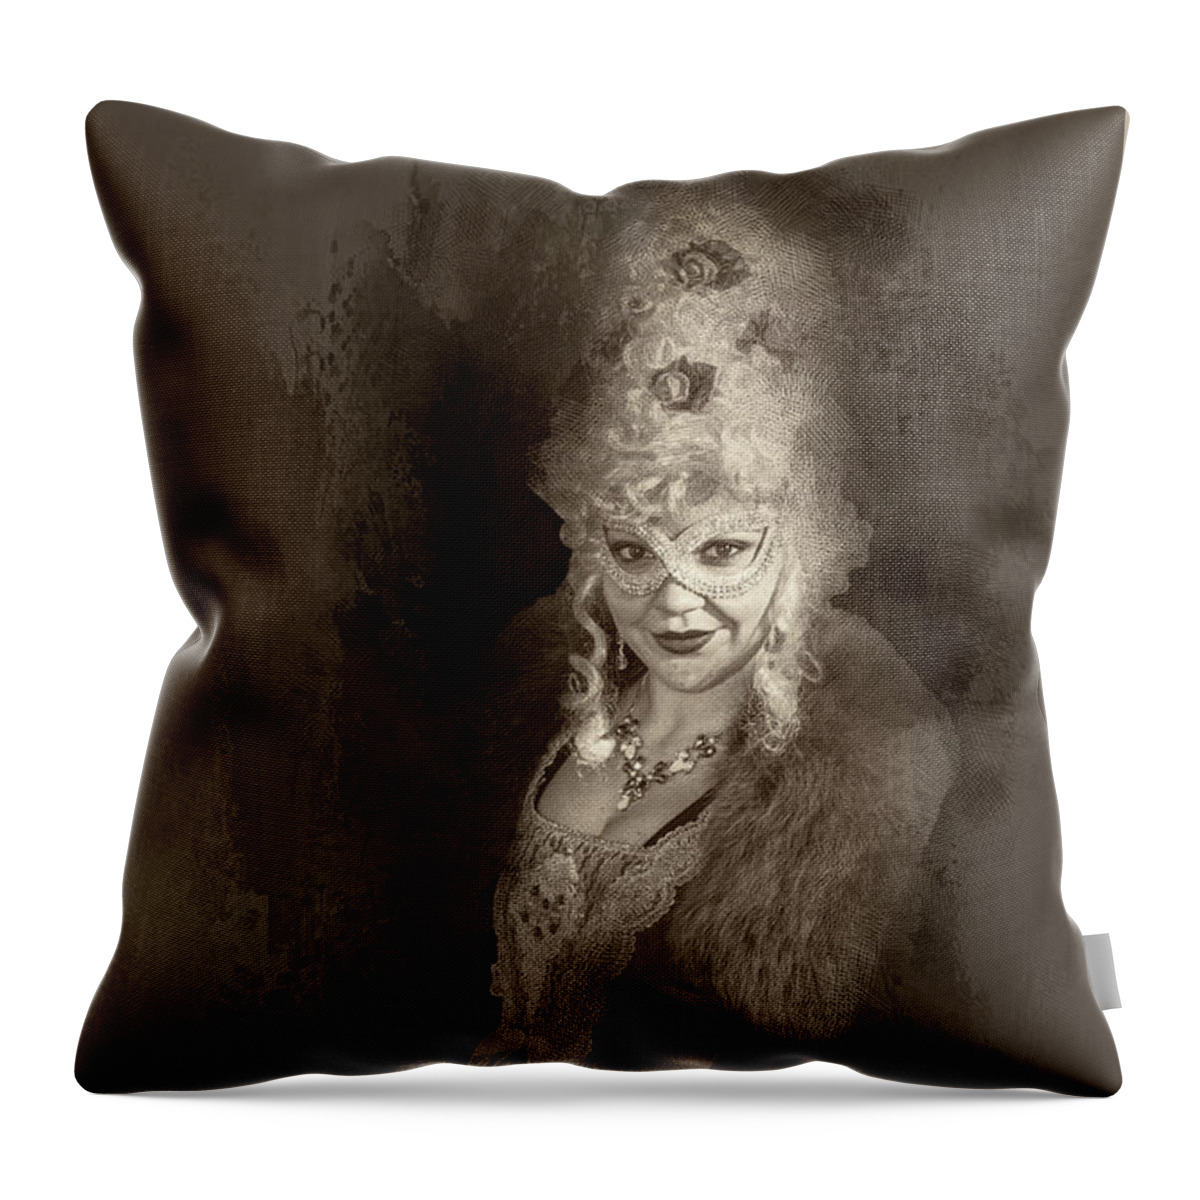 2017 Throw Pillow featuring the photograph Che Bellezza Grigia by Jack Torcello